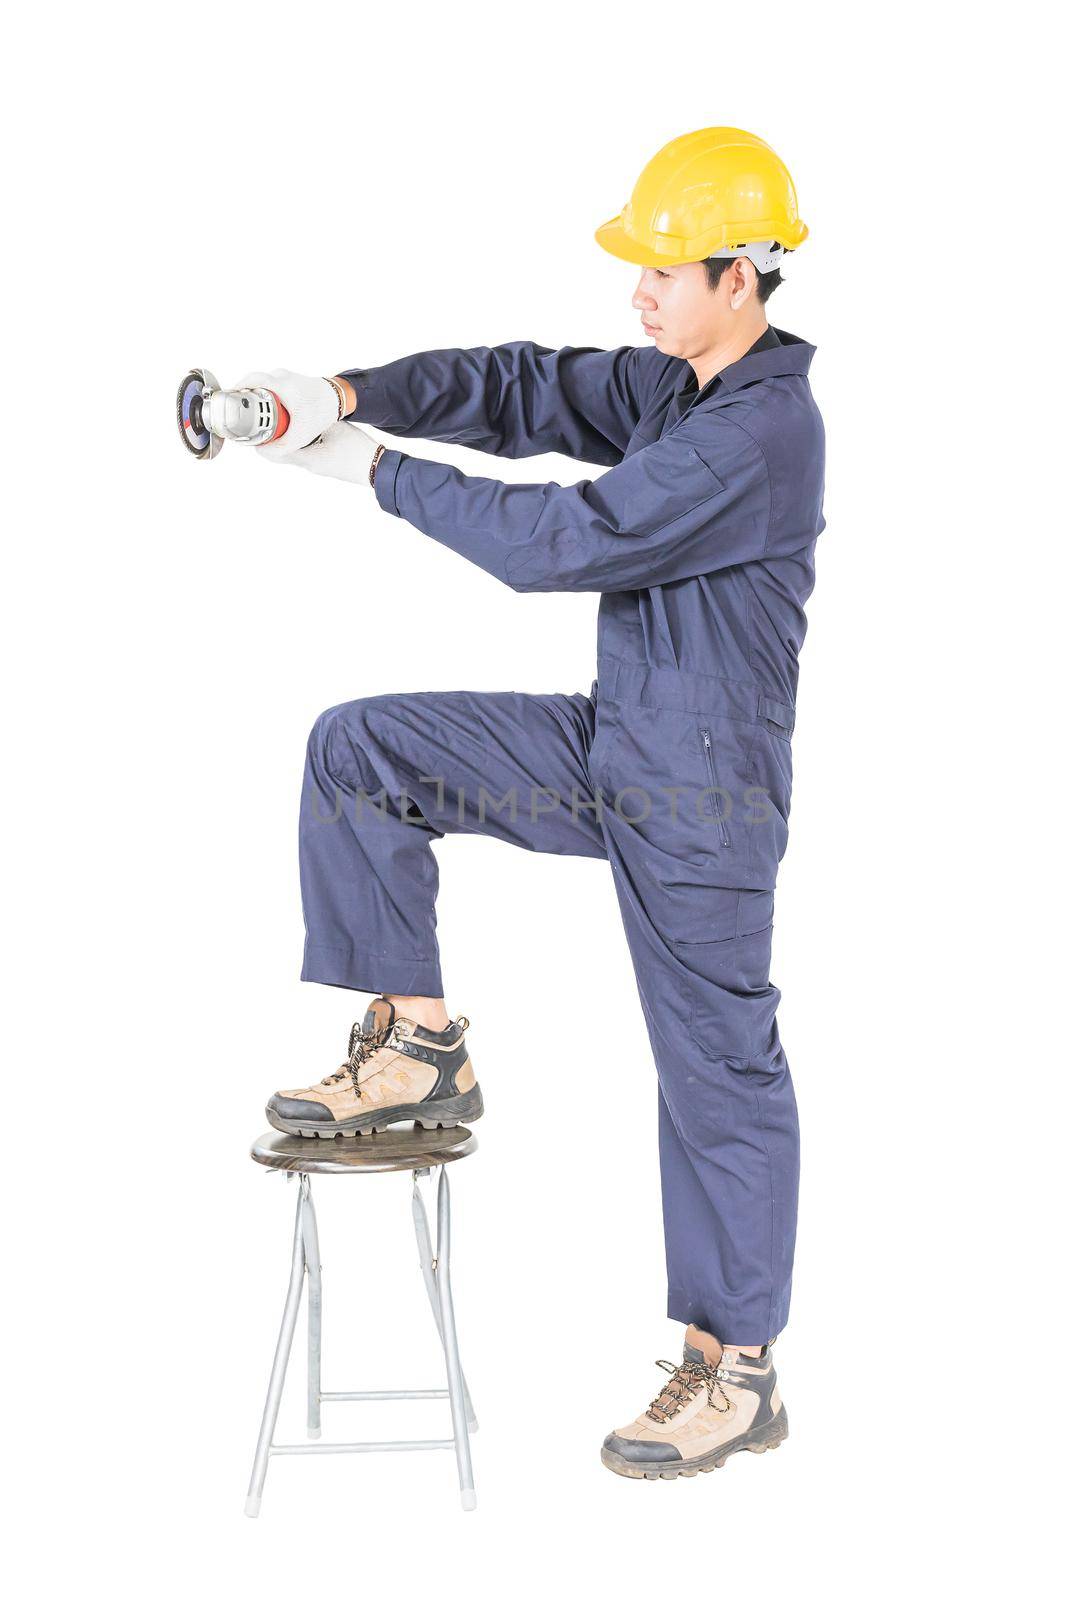 Man in uniform hold grinder, Cutout isolated on white by stoonn